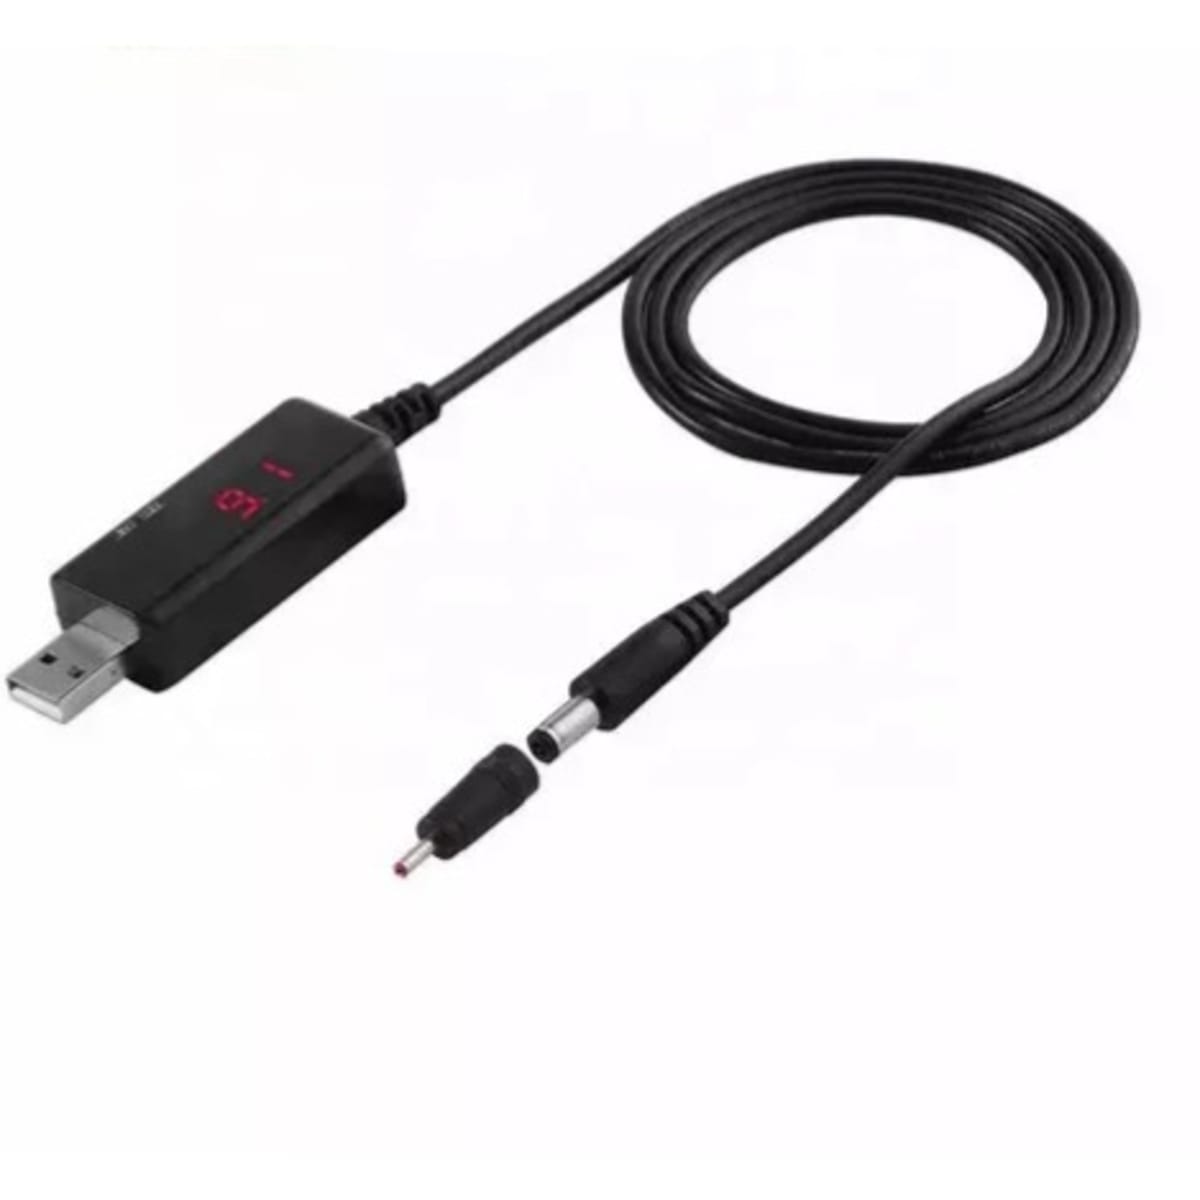 Dc 5v To 9v or 12v Usb Step-up Boost Converter Cable For Router With Digital  Display